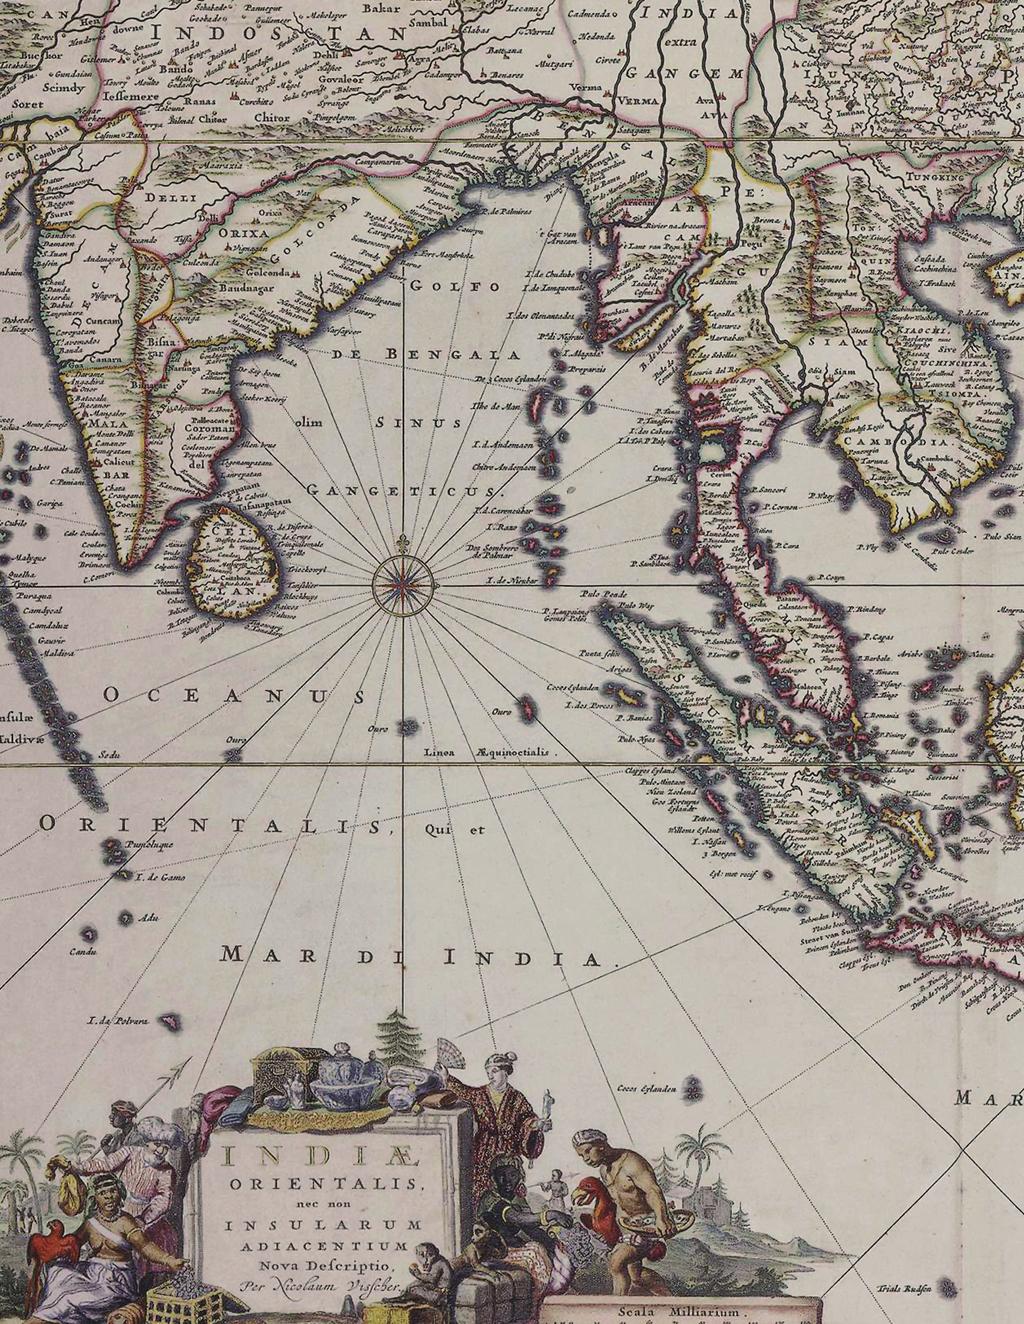 Inside Cover Photo: Early map of Southeast Asia territory dominated by the Dutch